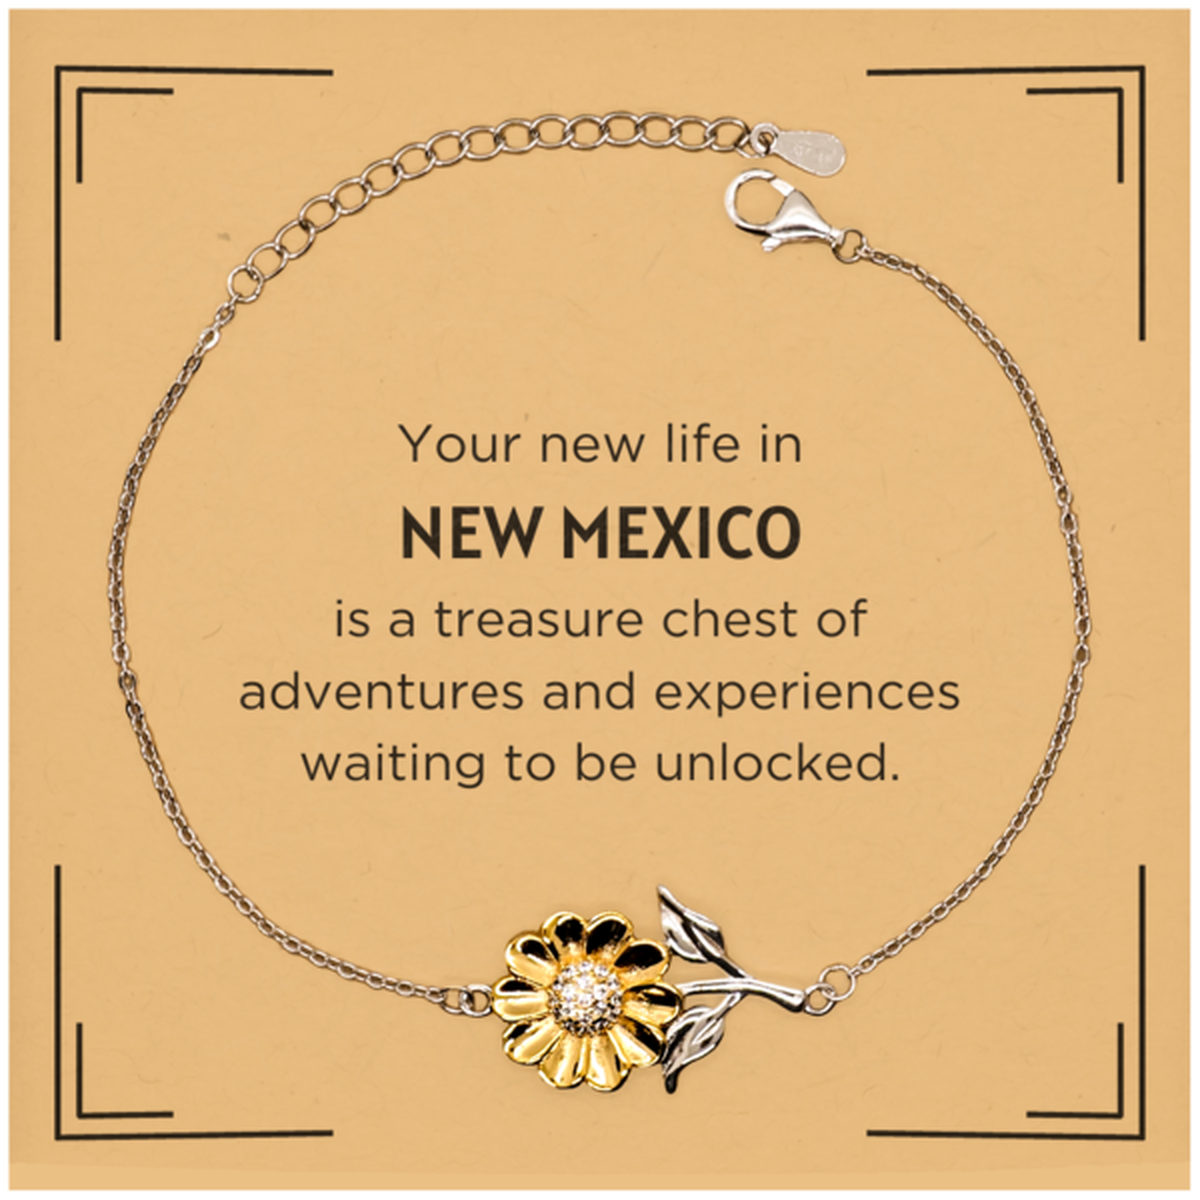 Moving to New Mexico Gifts, Your new life in New Mexico, Long Distance New Mexico Christmas Sunflower Bracelet For Men, Women, Friends, Coworkers